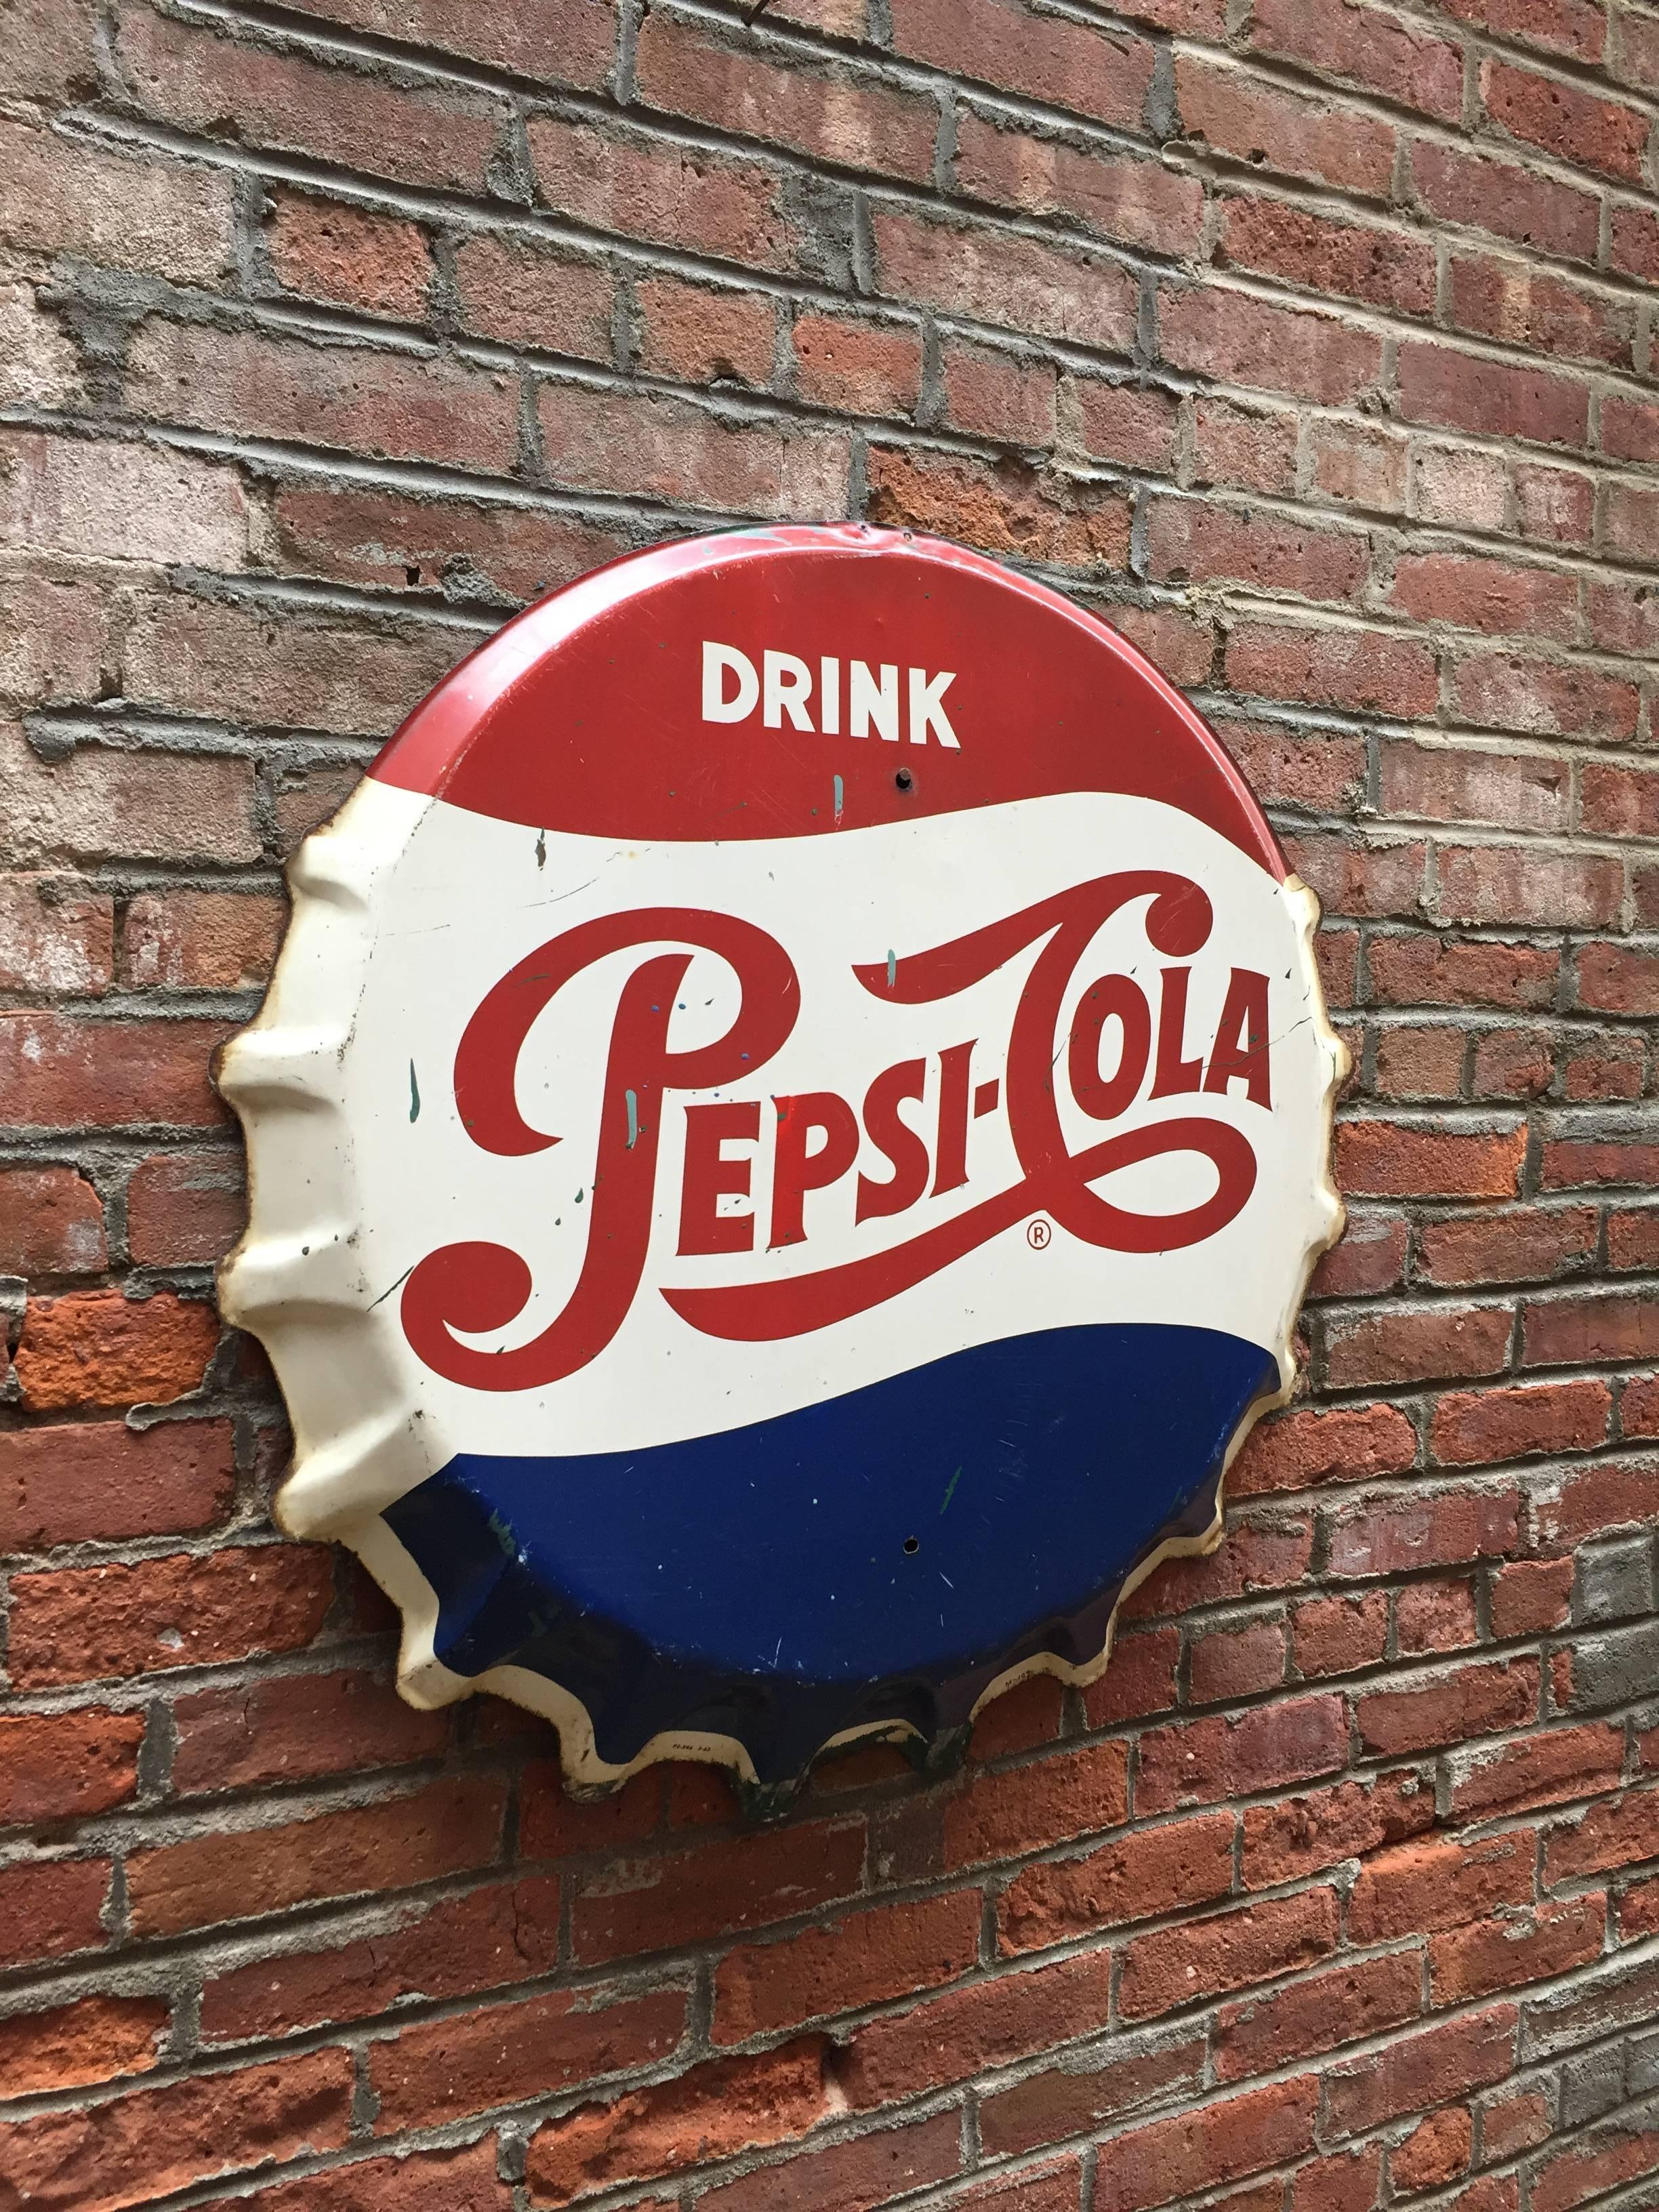 Iconic and rare Pepsi Cola bottle cap sign, circa 1950-1960. Very good original condition with some enamel losses, scratches and light rusting. Some paint drips.

Measures: 29.75